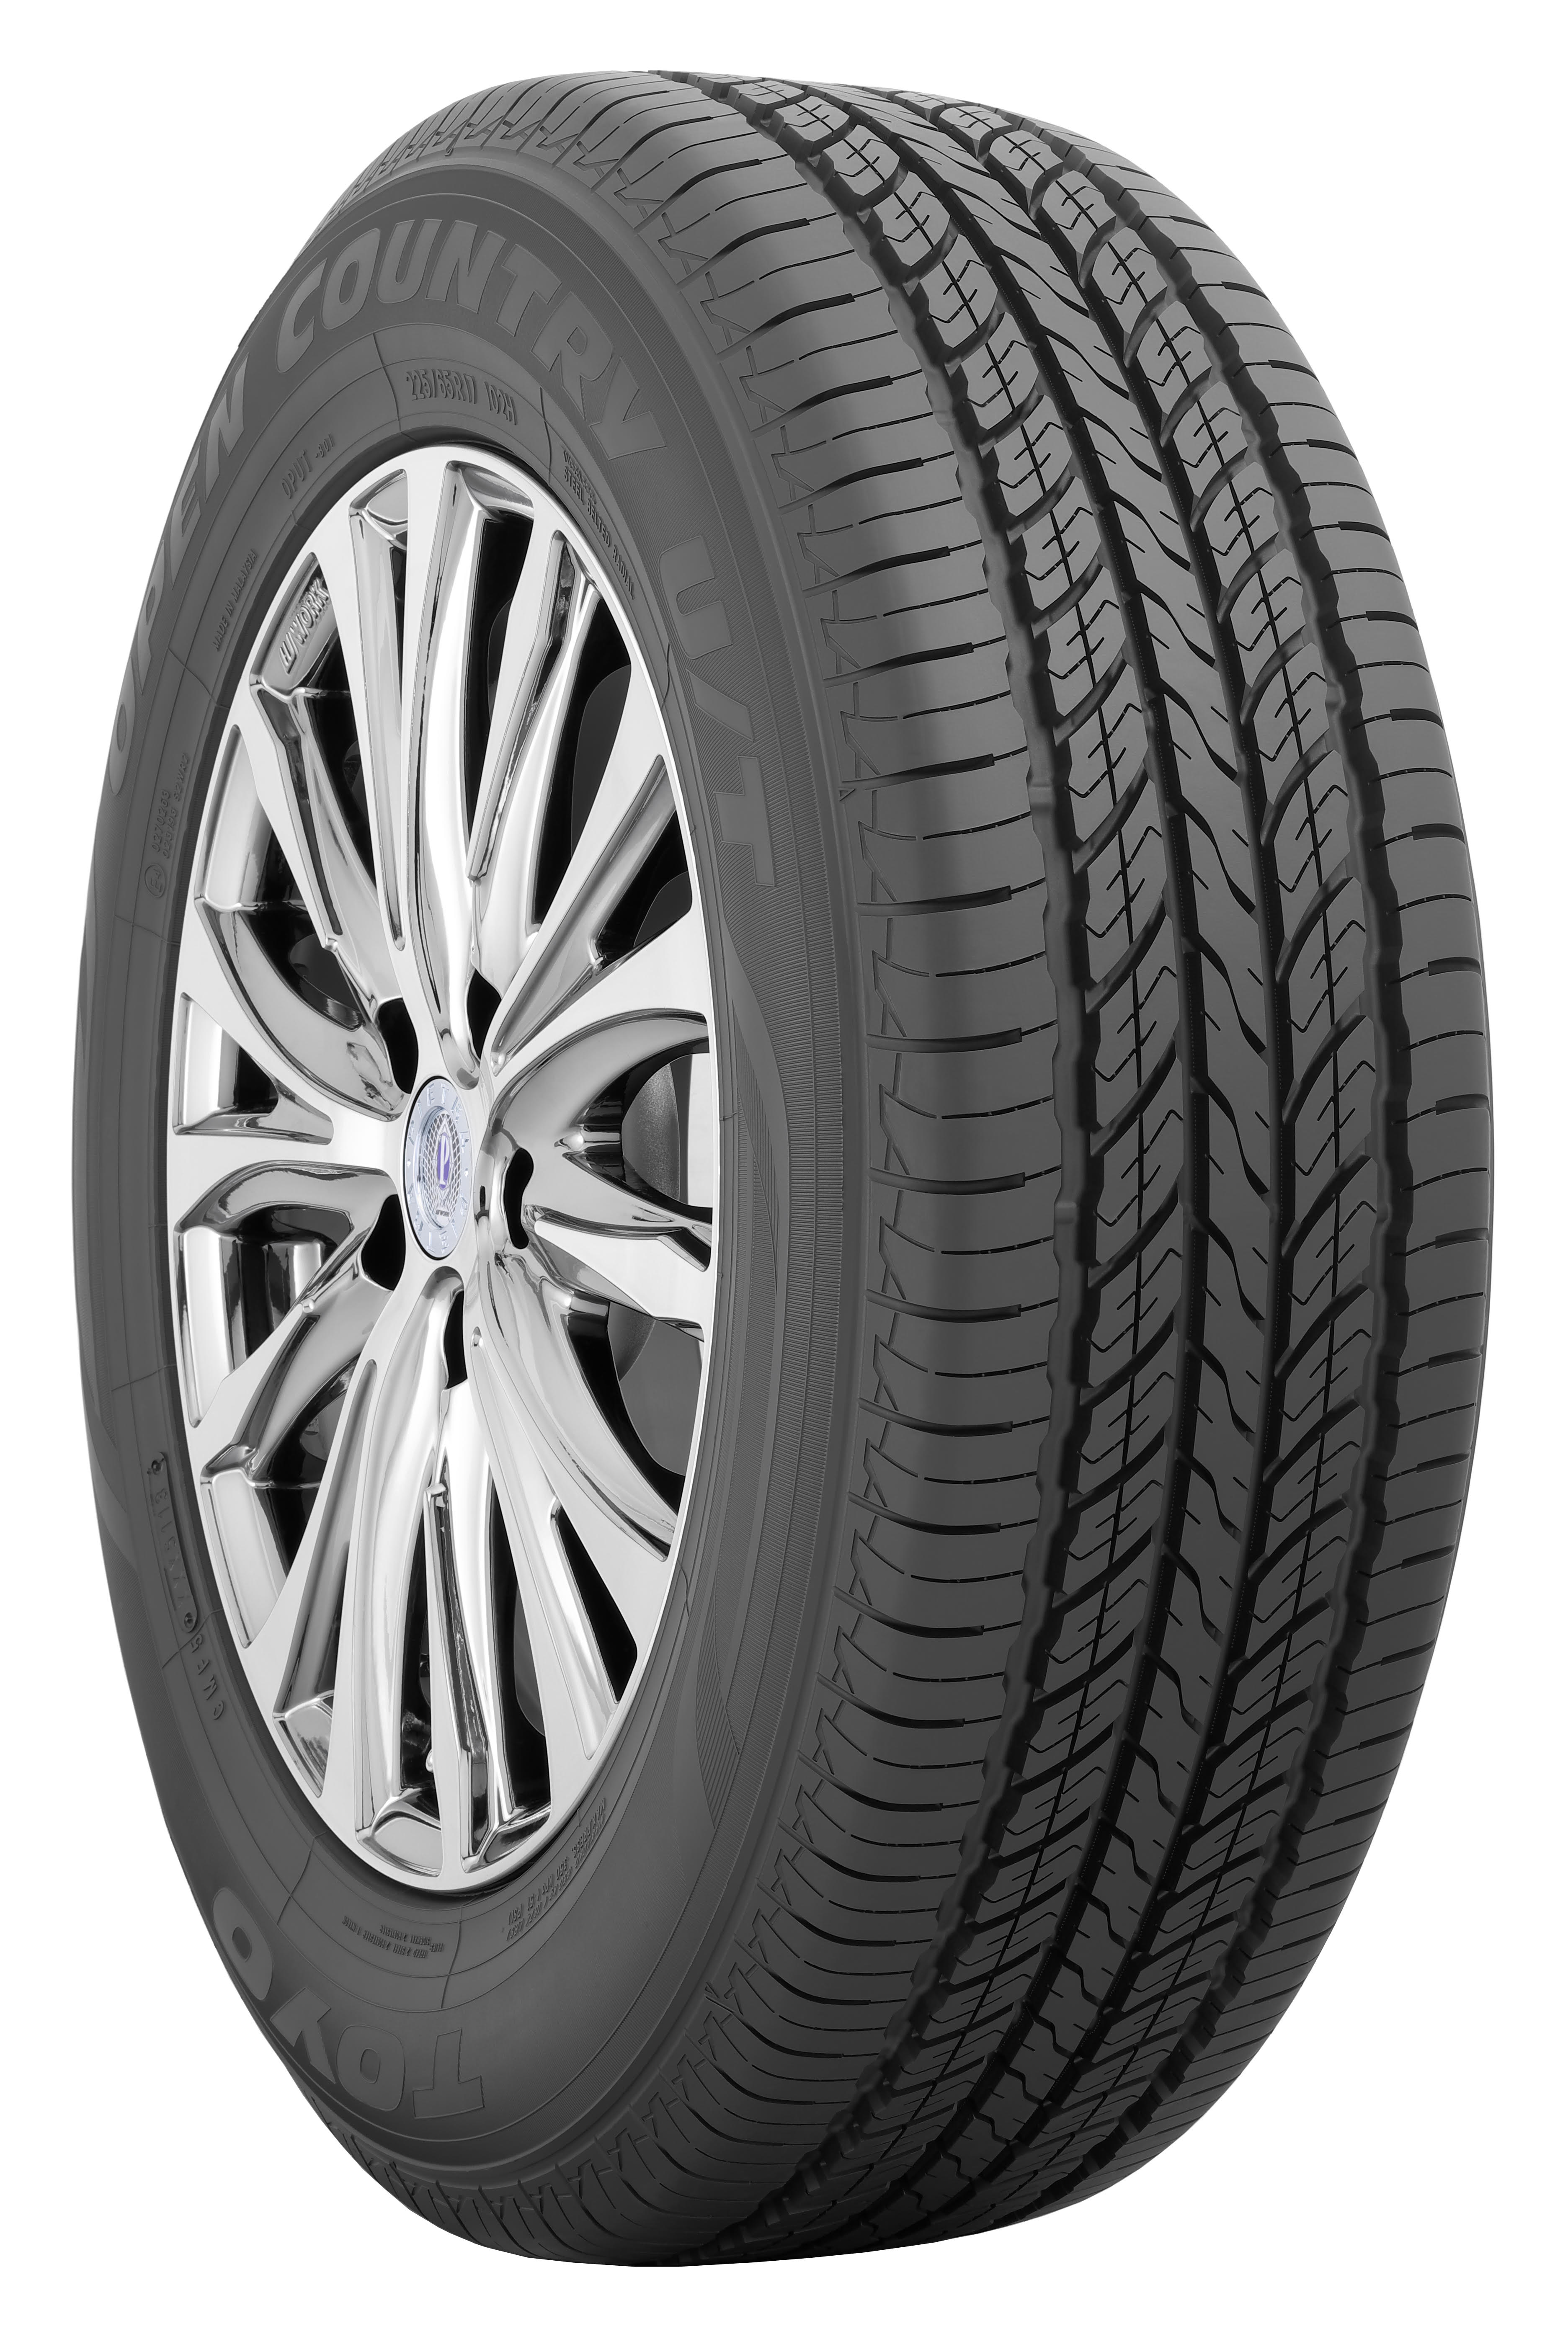 Toyo launches Open Country UT SUV tyre